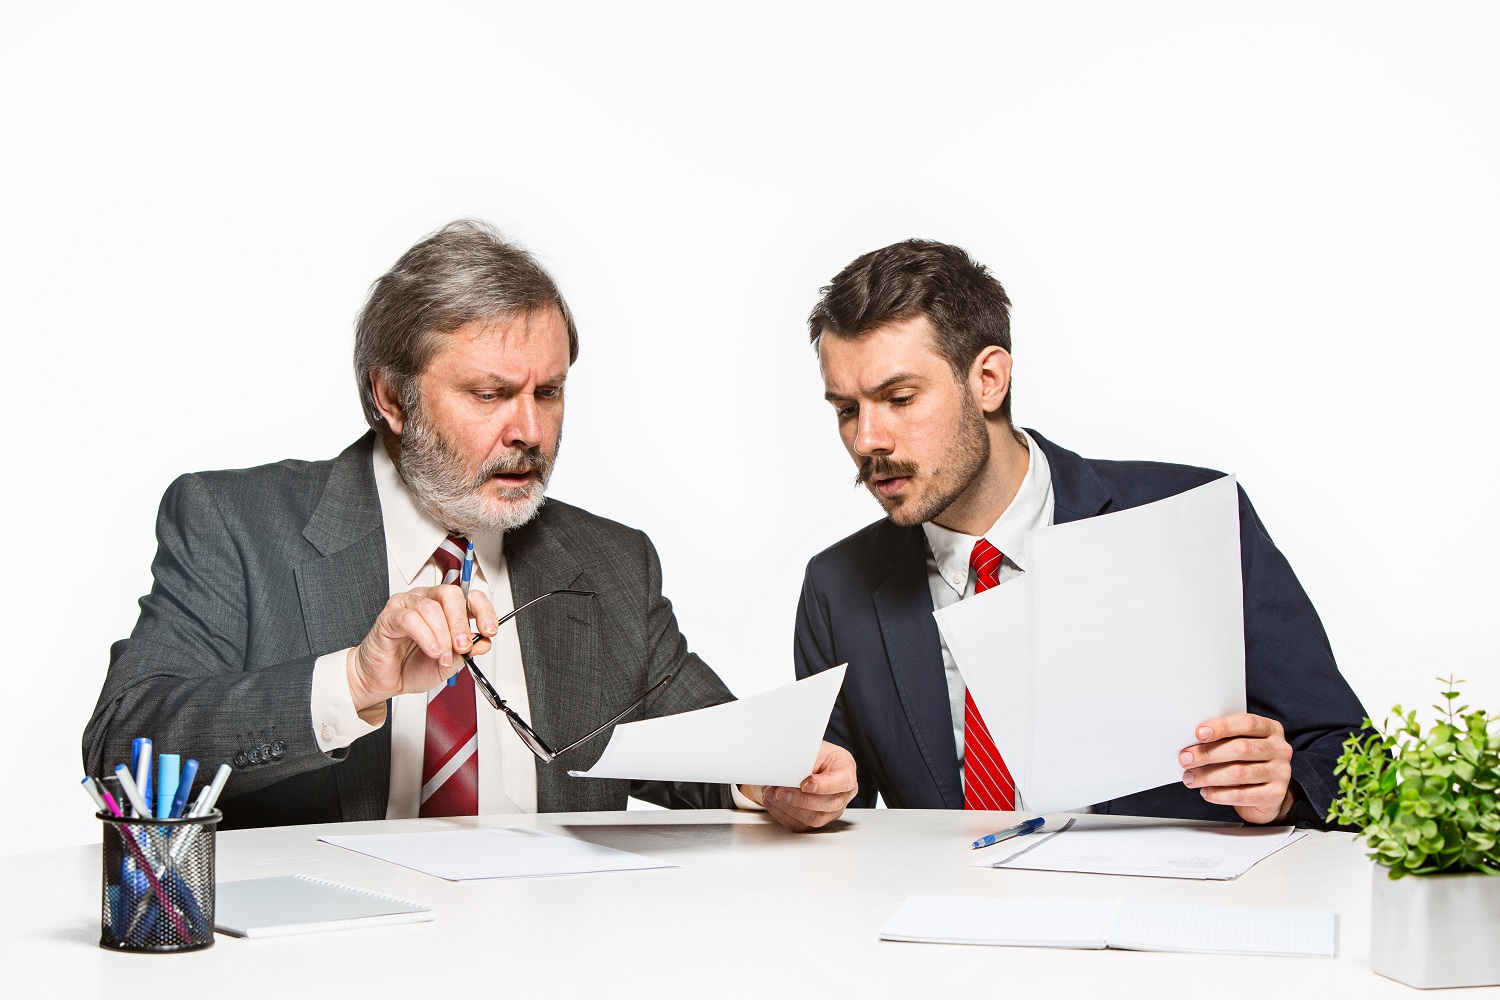 Personal vs. Commercial Debt Collection: What Sets Them Apart?